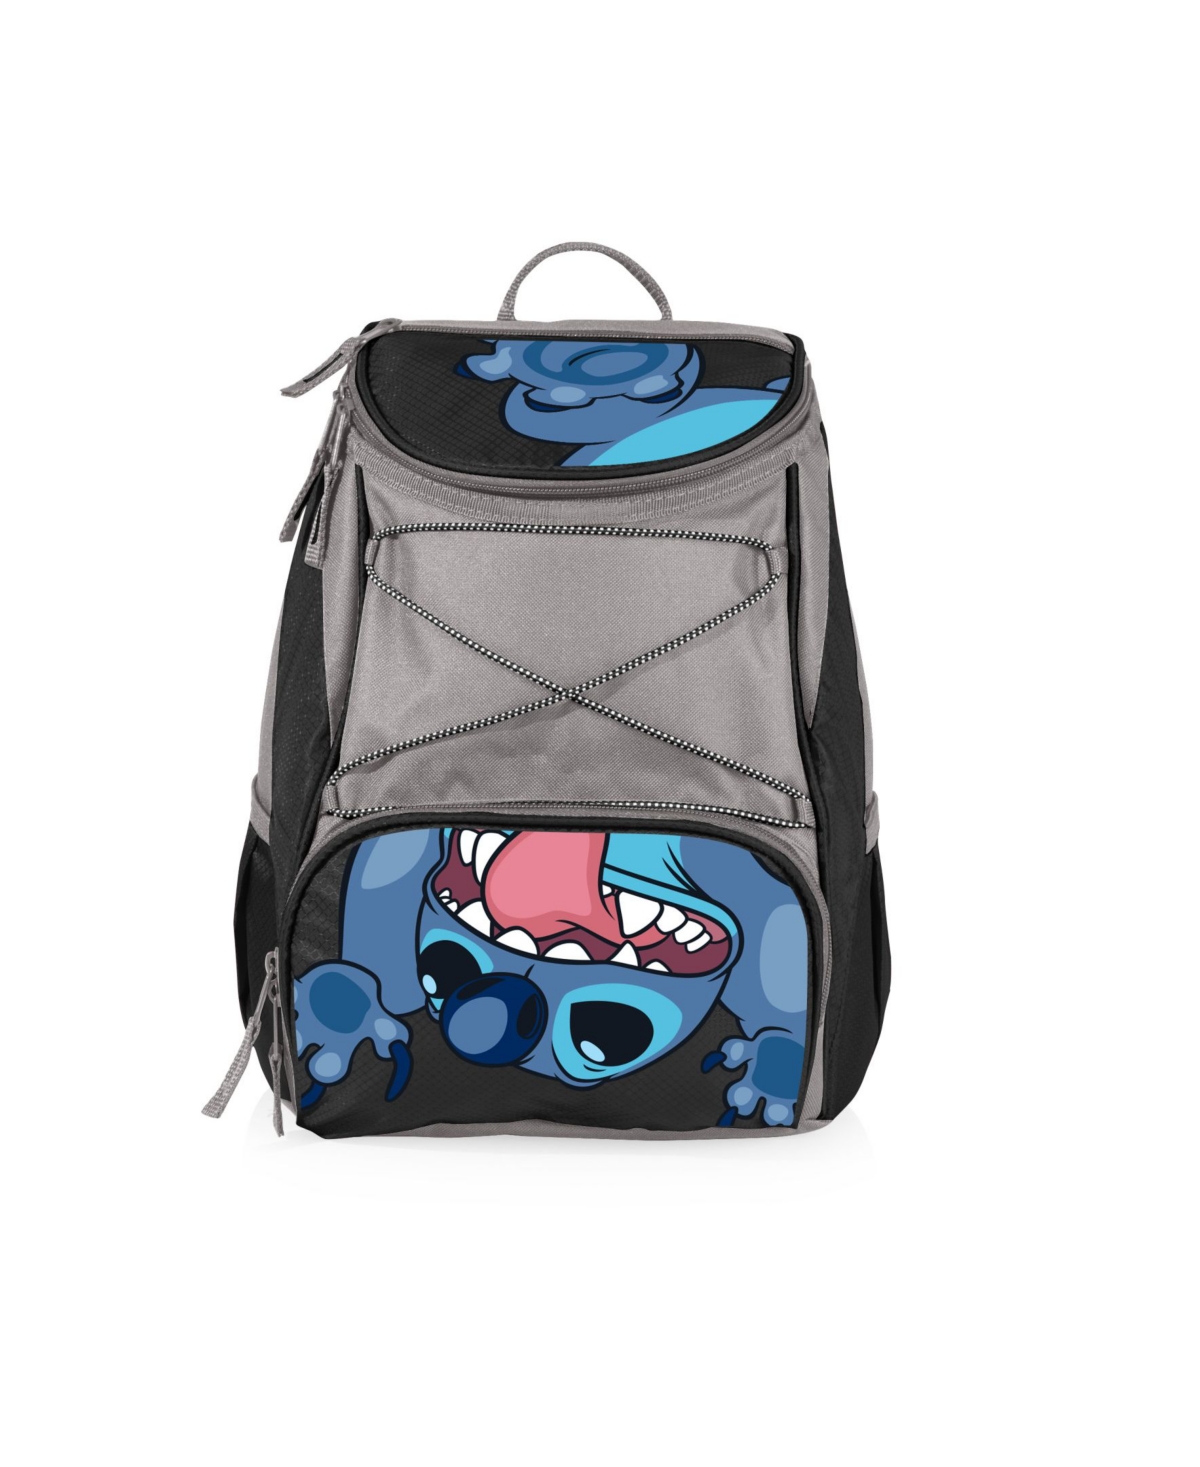 Disney's Lilo and Stitch Ptx Cooler Backpack - Black